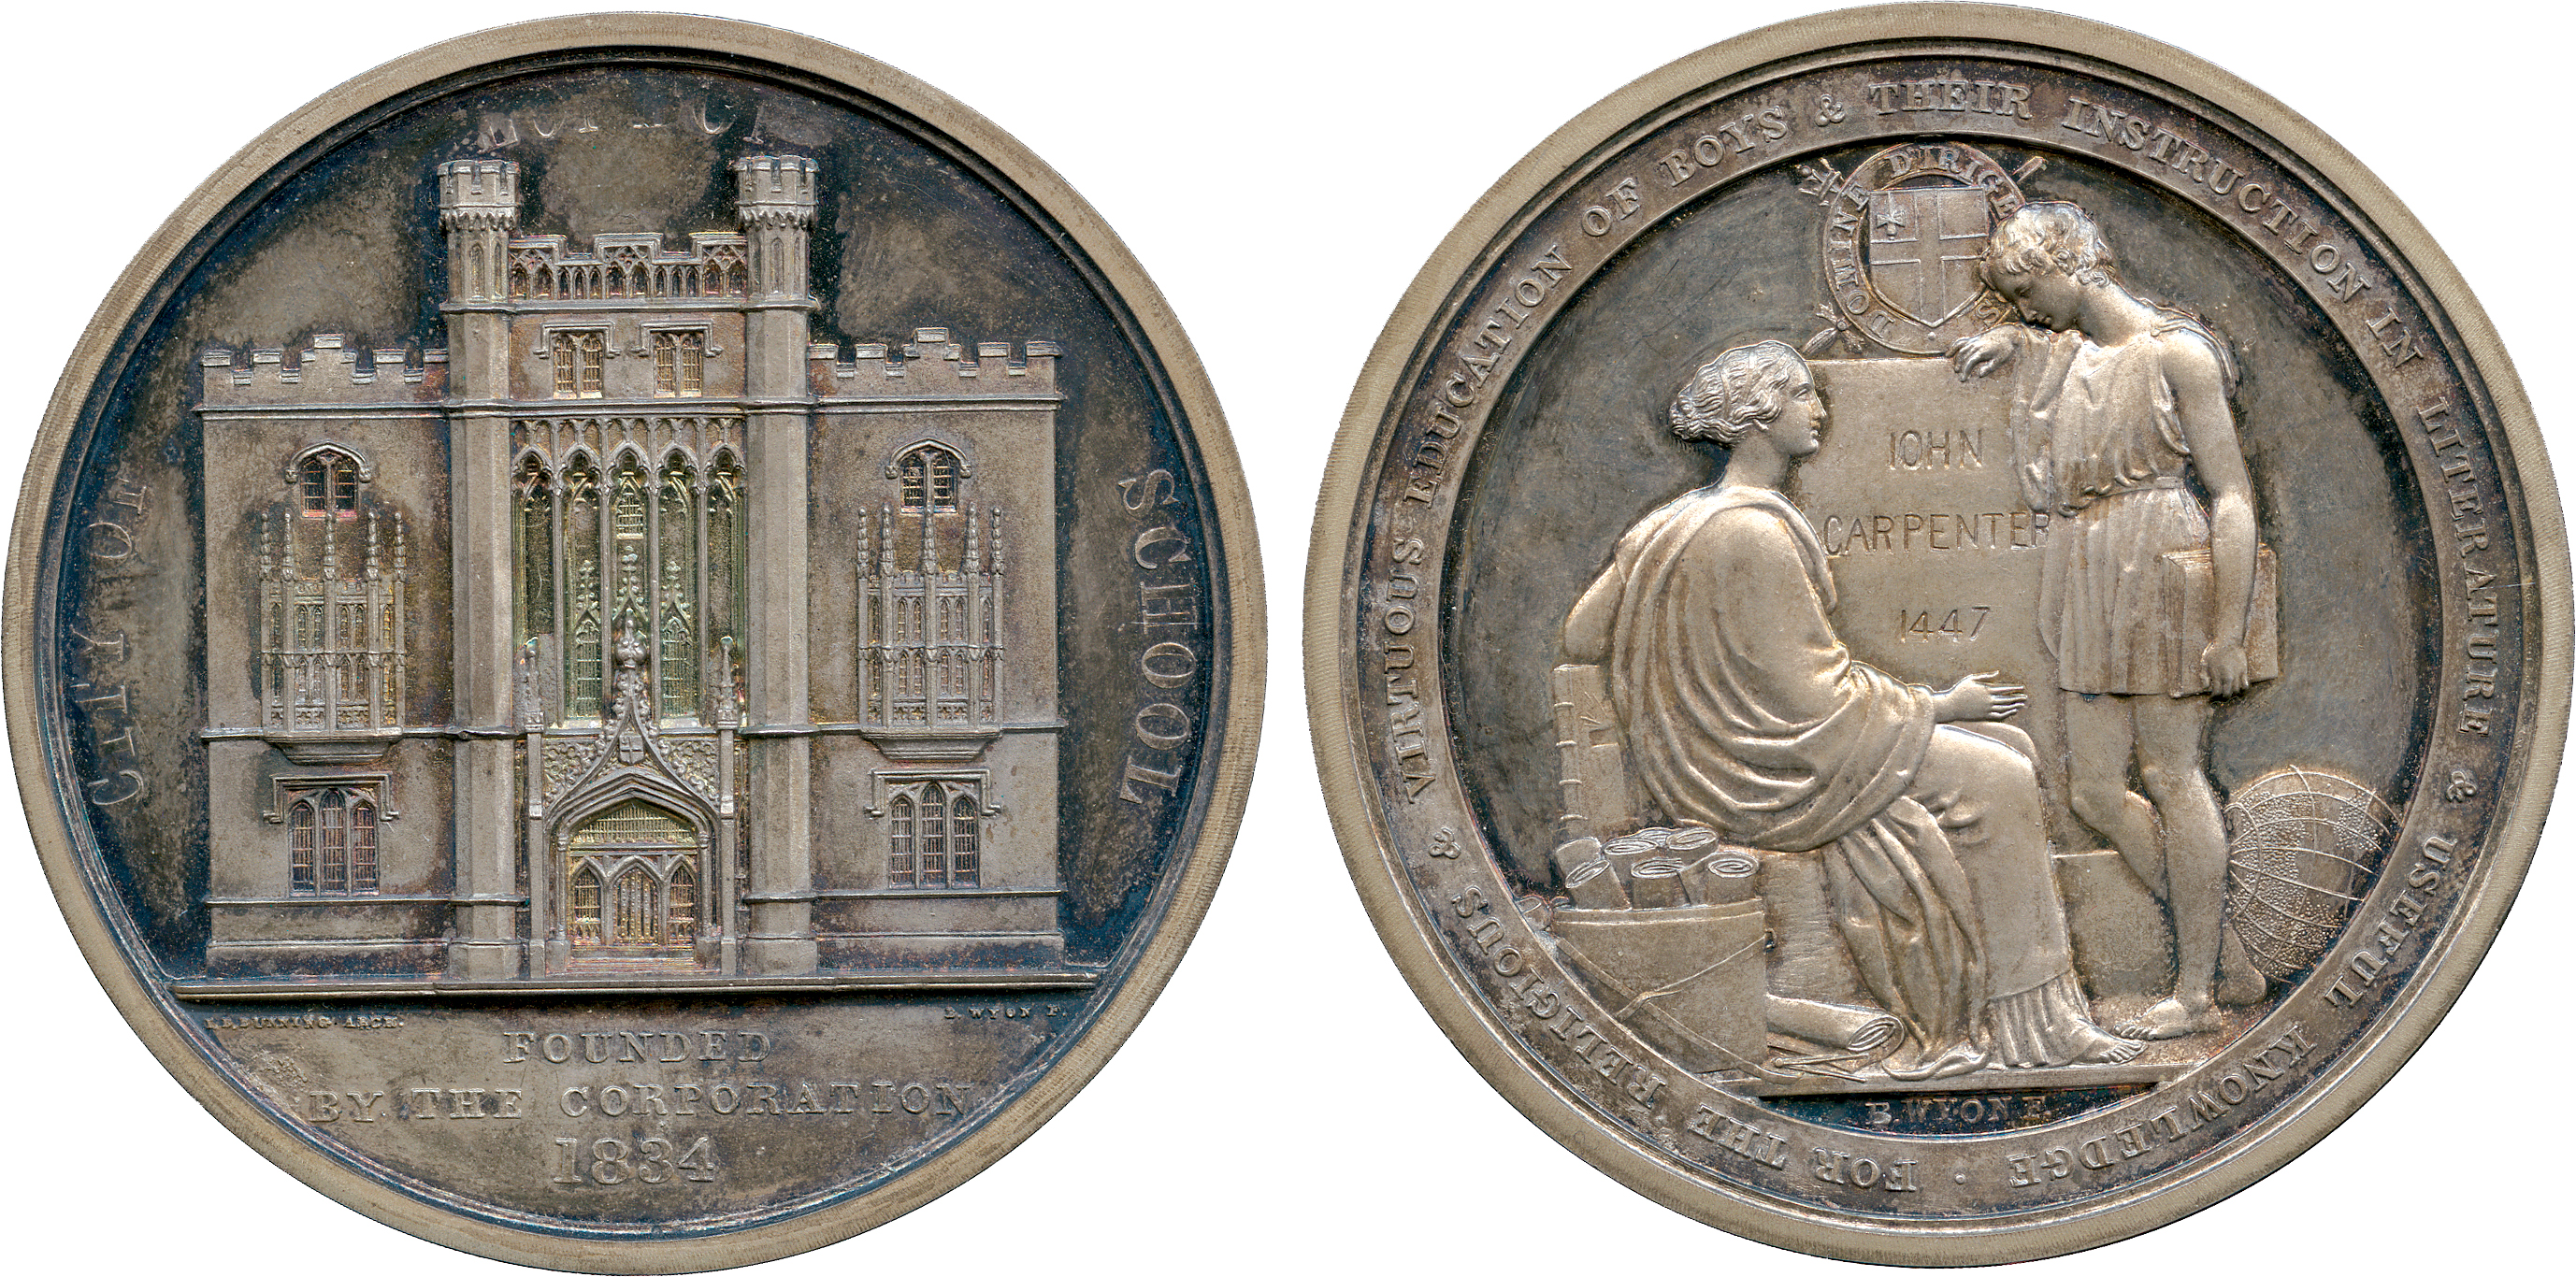 COMMEMORATIVE MEDALS, BRITISH MEDALS, Corporation of London Medals, Foundation of the City of London